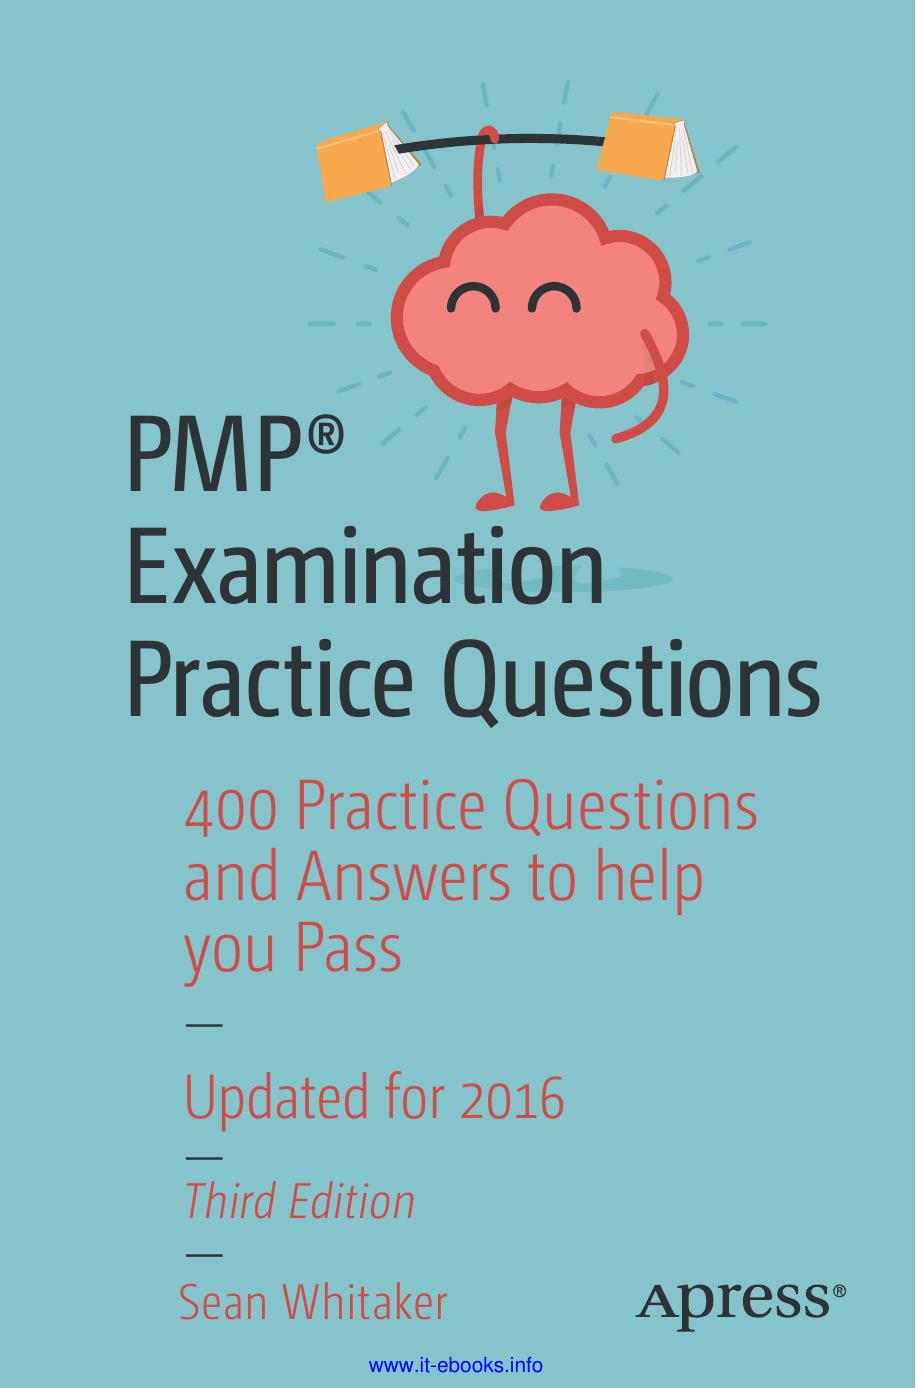 PMP® Examination Practice Questions